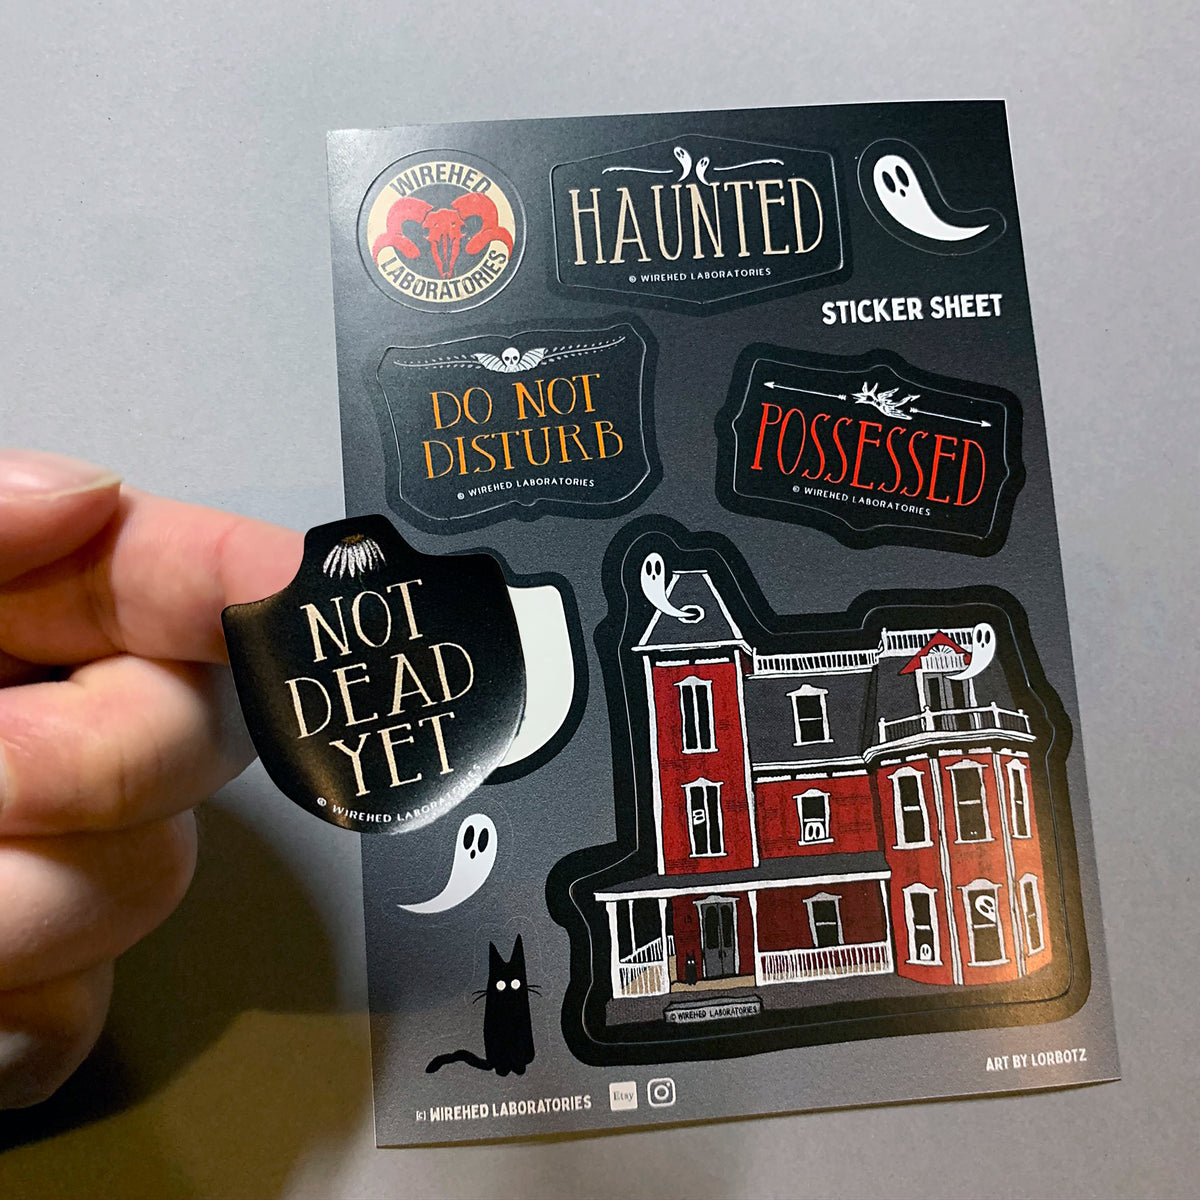 Haunted House Vinyl Sticker Sheet! 9 Spooky, Waterproof 5x7" Ghostly Goth Decals.